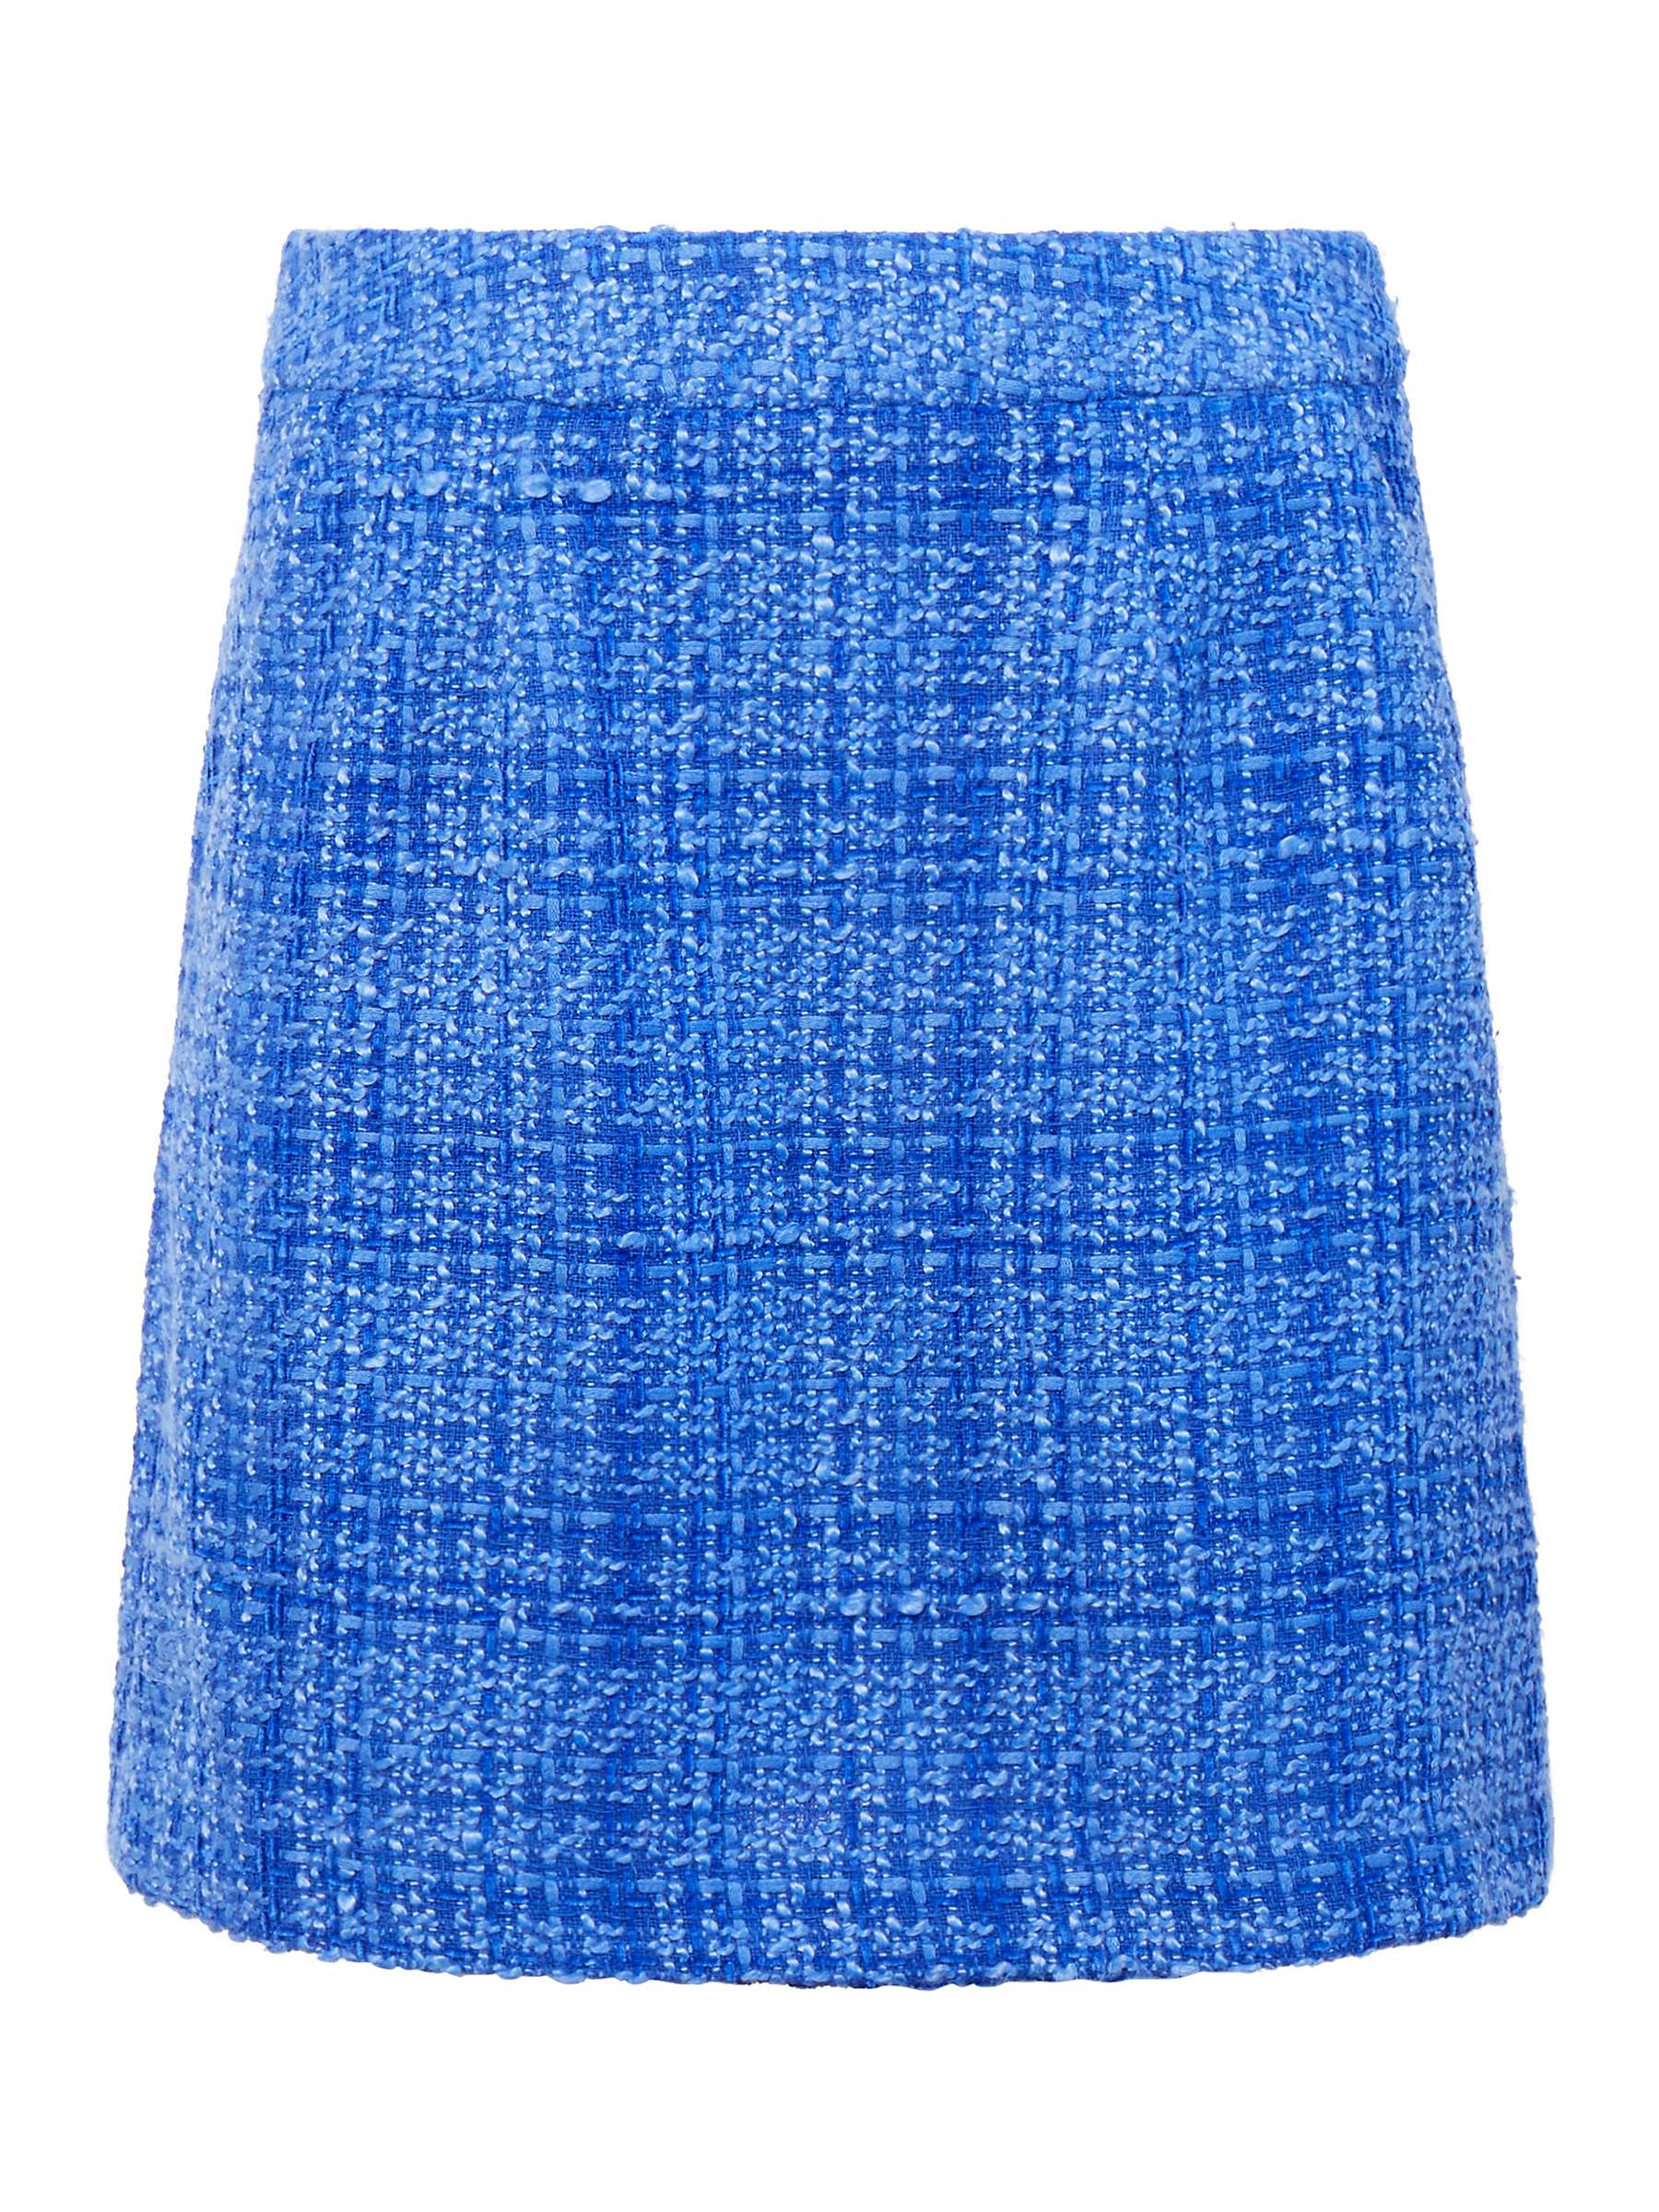 Buy French Connection Azzurra Tweed Mini Skirt, Light Blue Depths Online at johnlewis.com